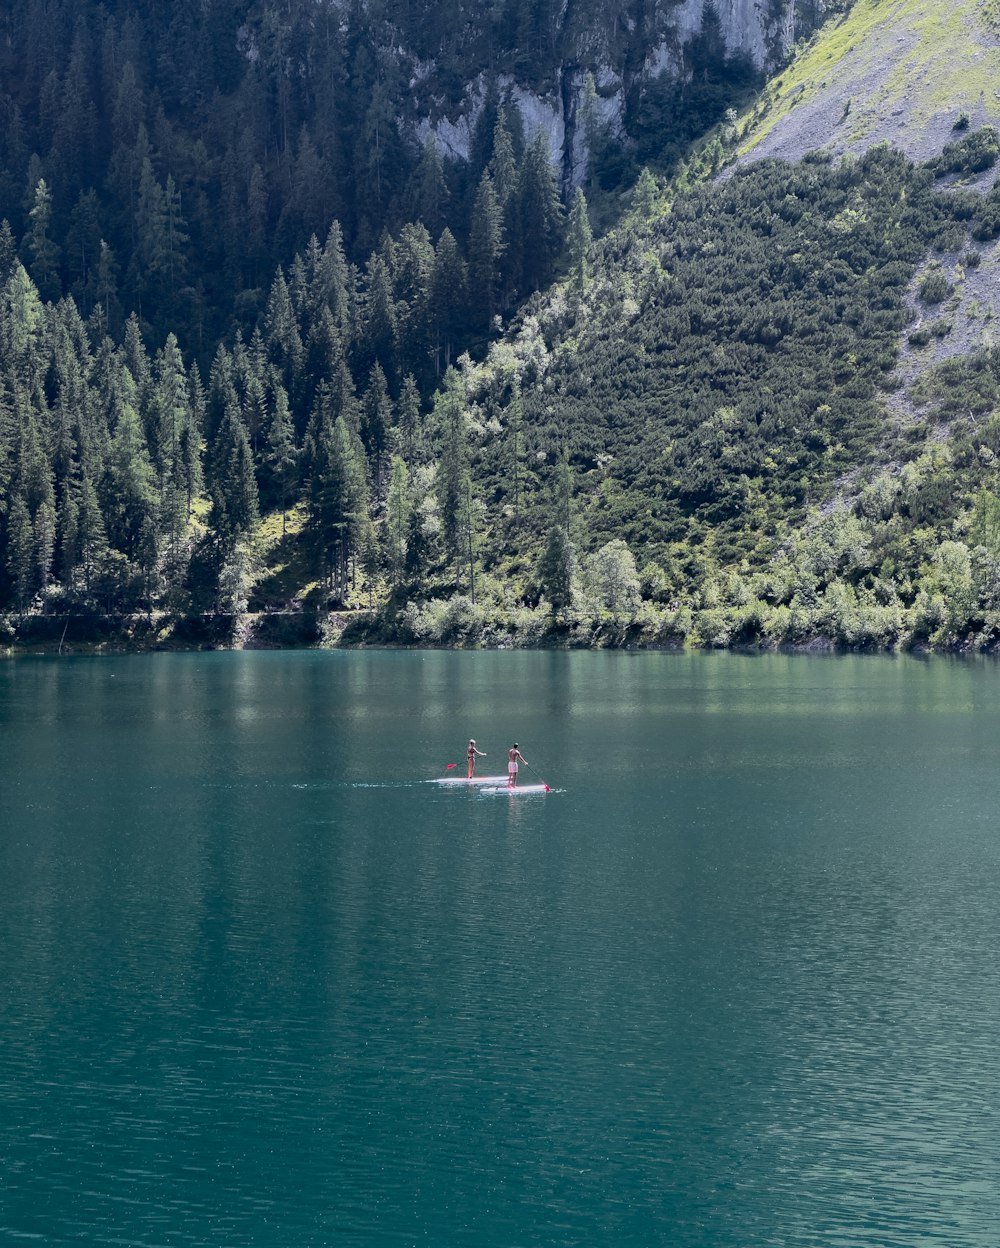 a man is rowing a boat on a lake